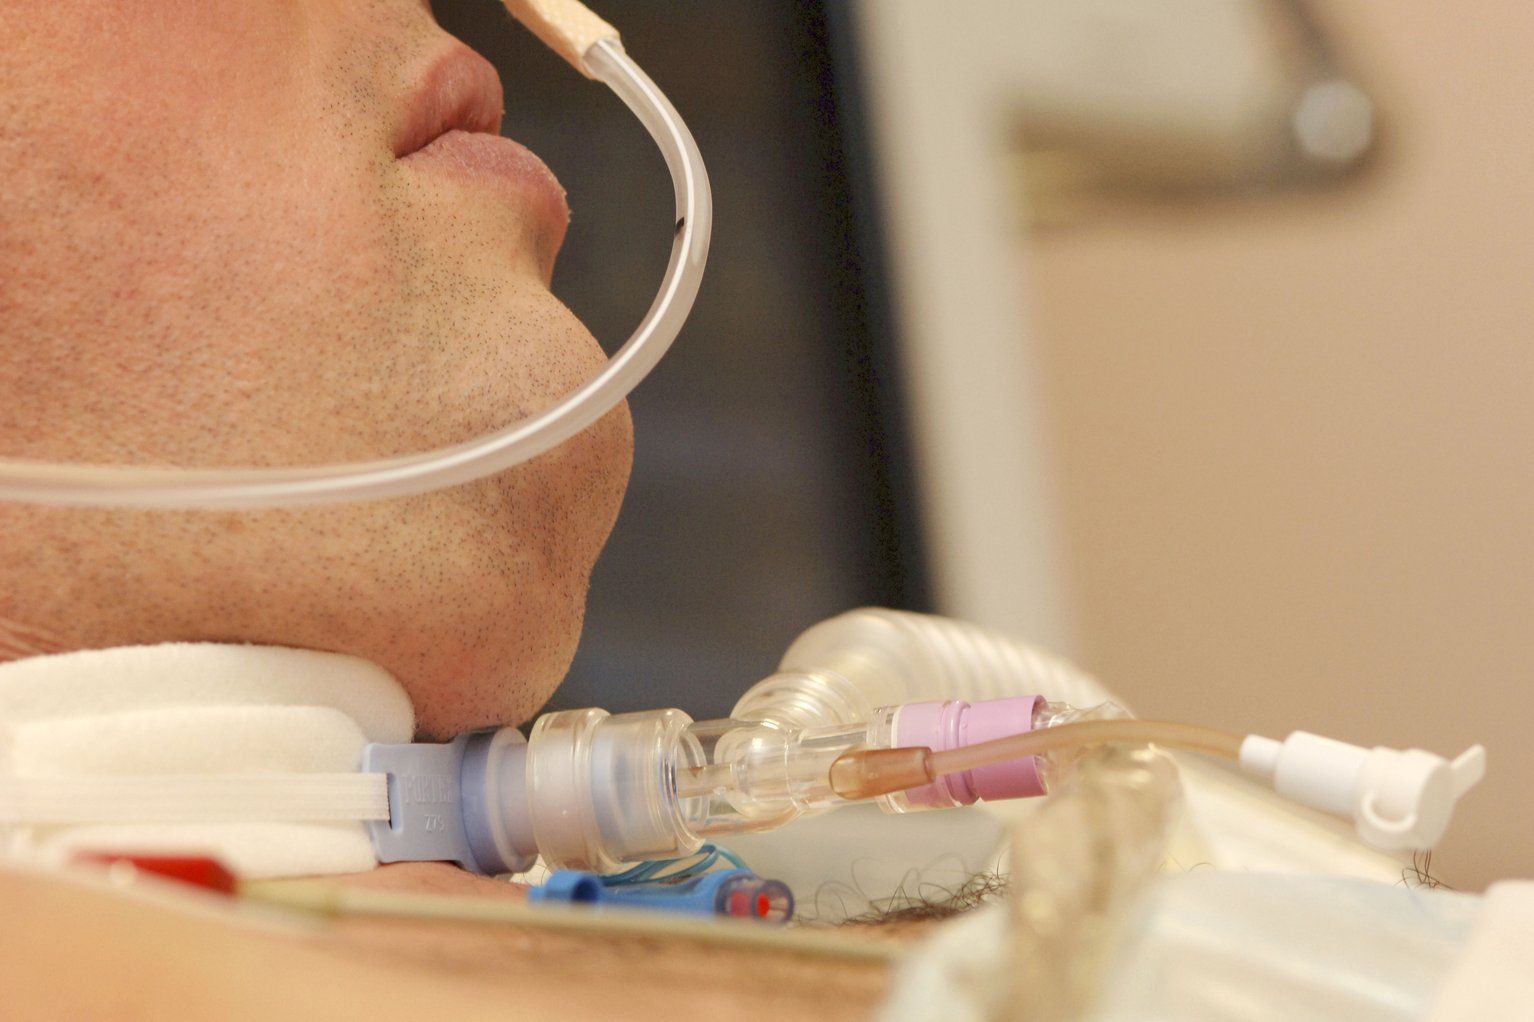 Improving tracheostomy care during Covid